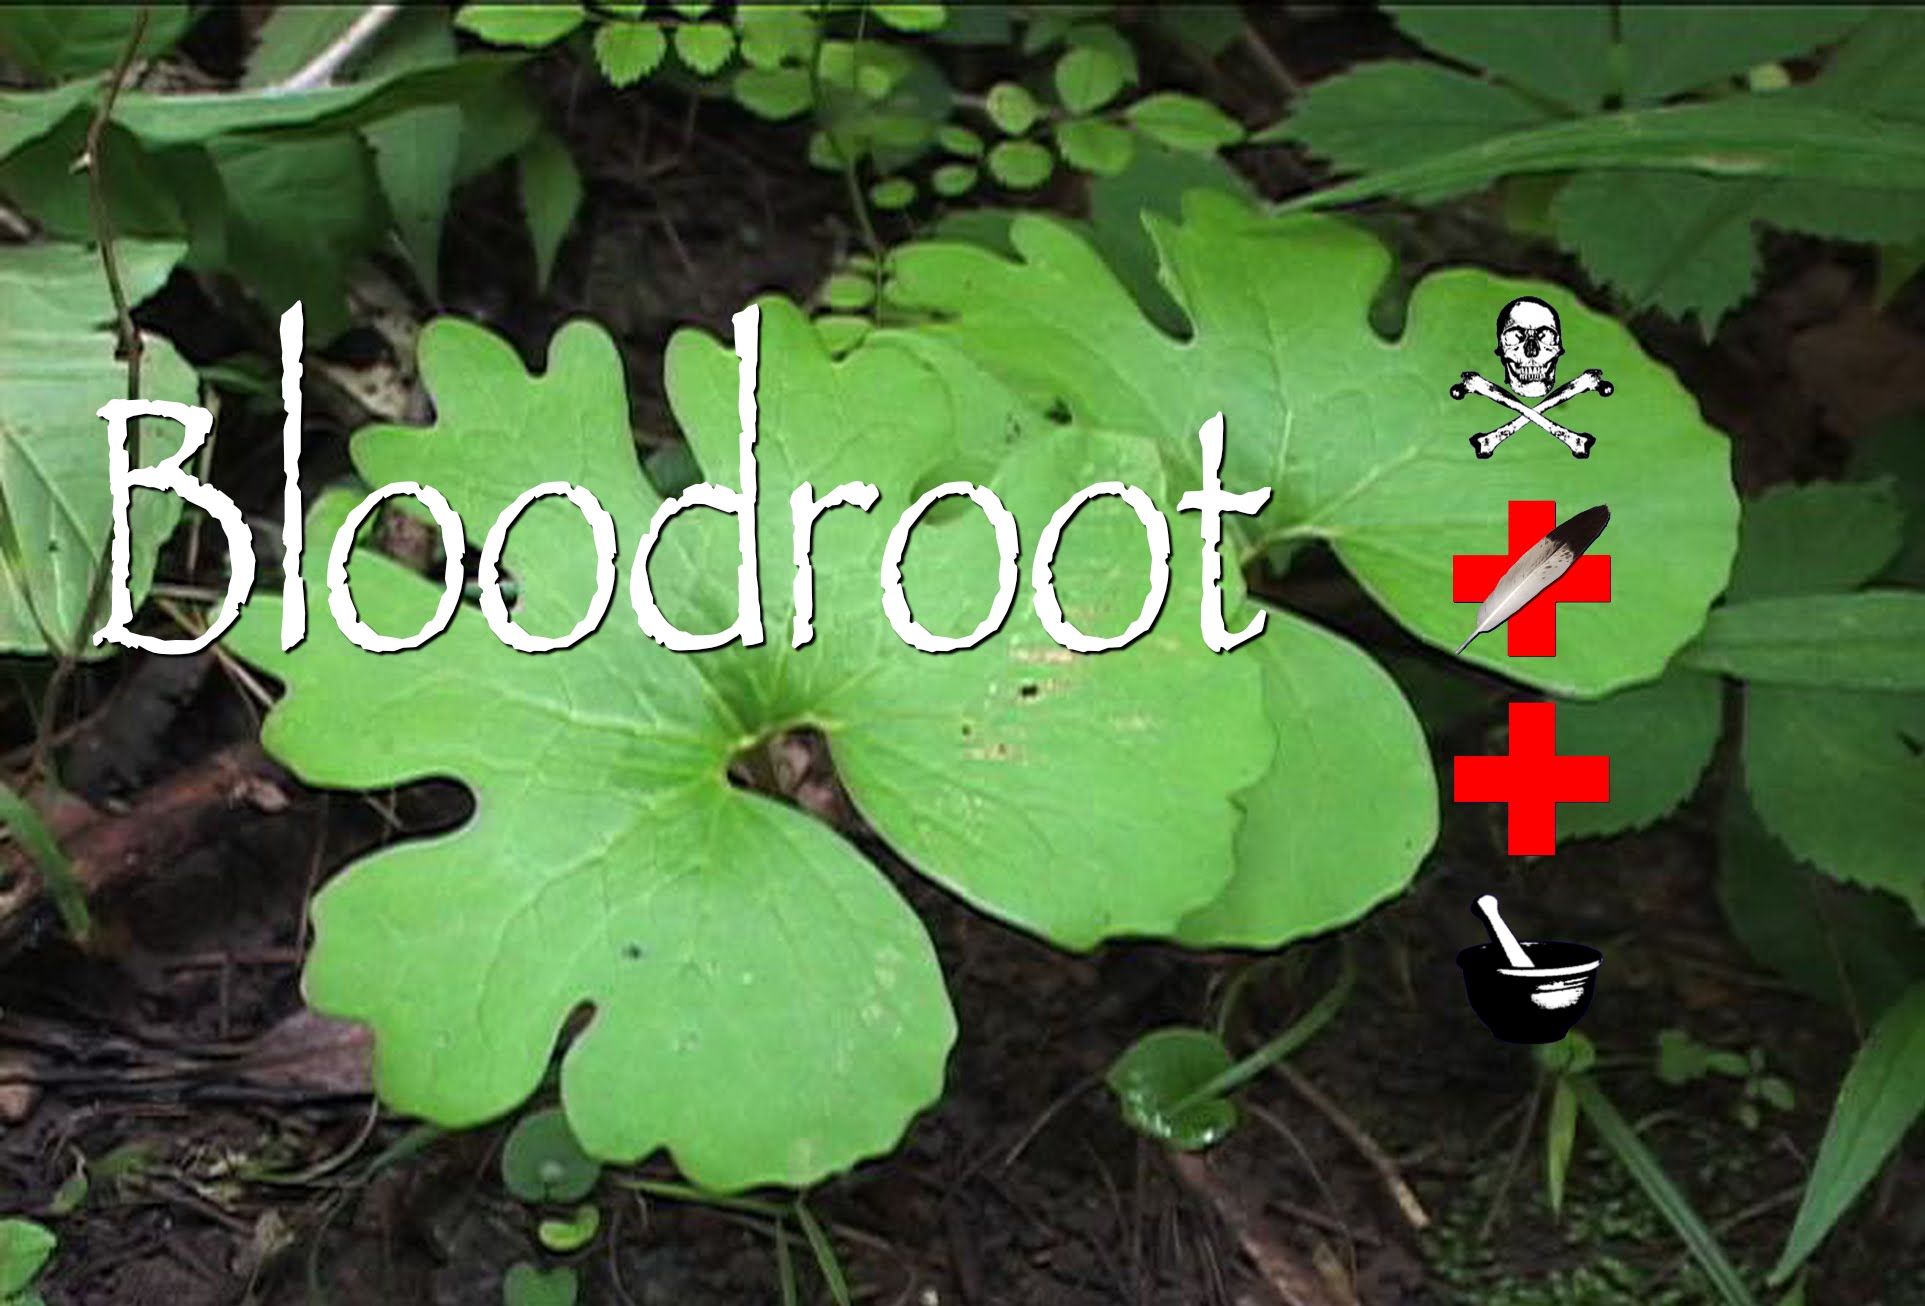 Bloodroot: Poison, Medicinal & Other Uses - YouTube